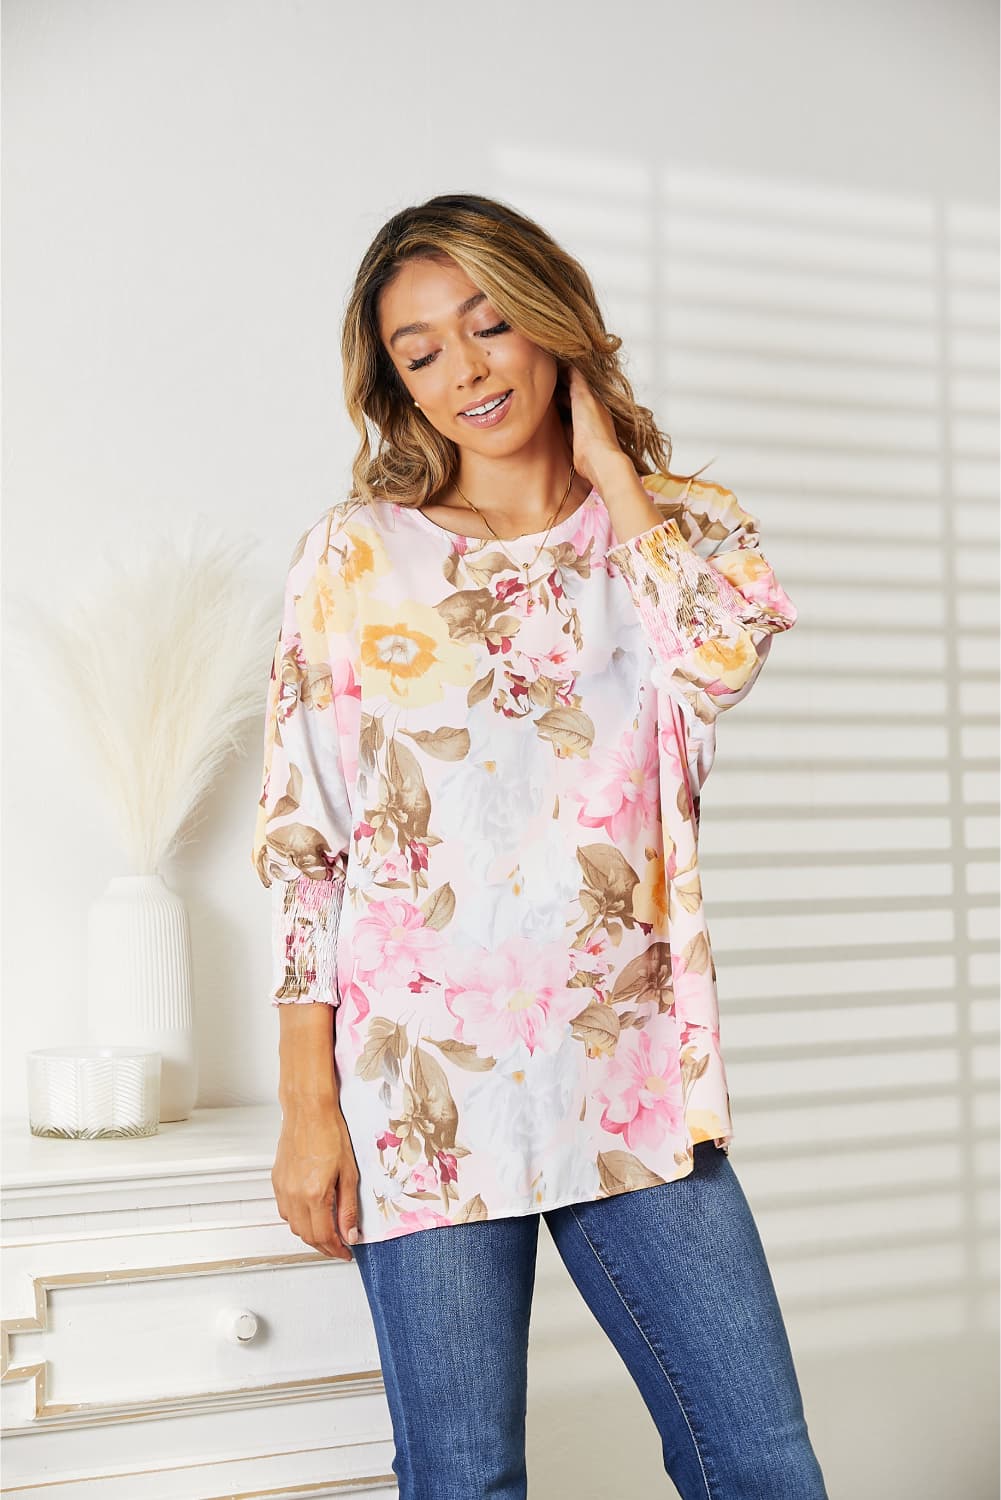 Double Take Floral Round Neck Three-Quarter Sleeve Top - nailedmoms